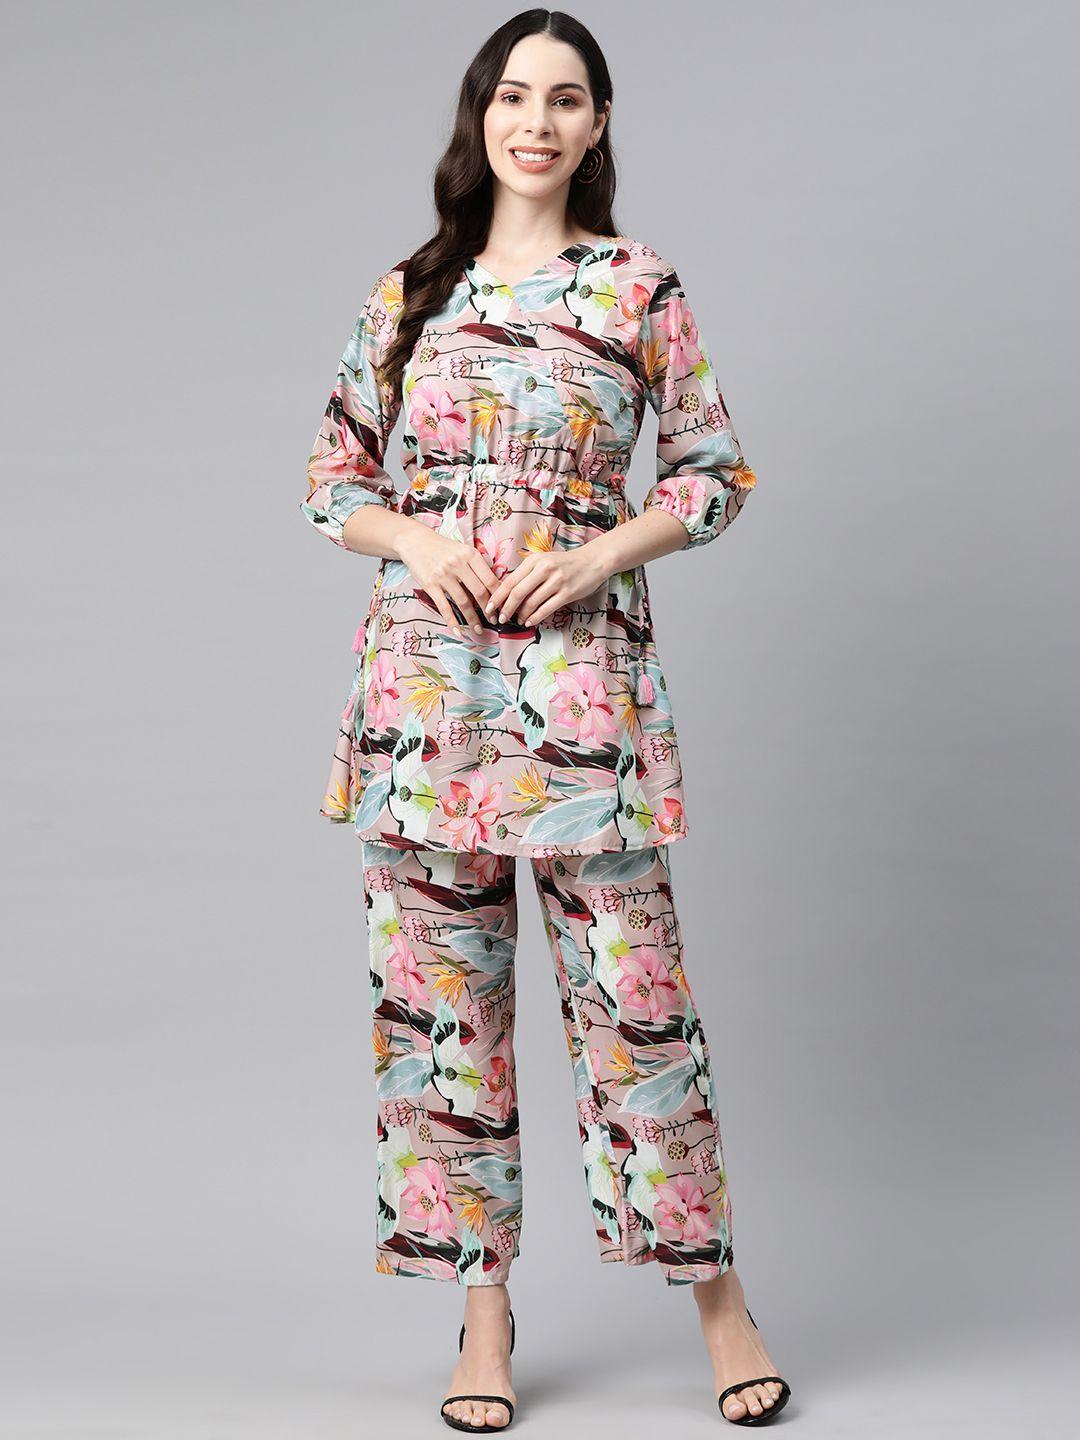 readiprint fashions floral printed co-ords